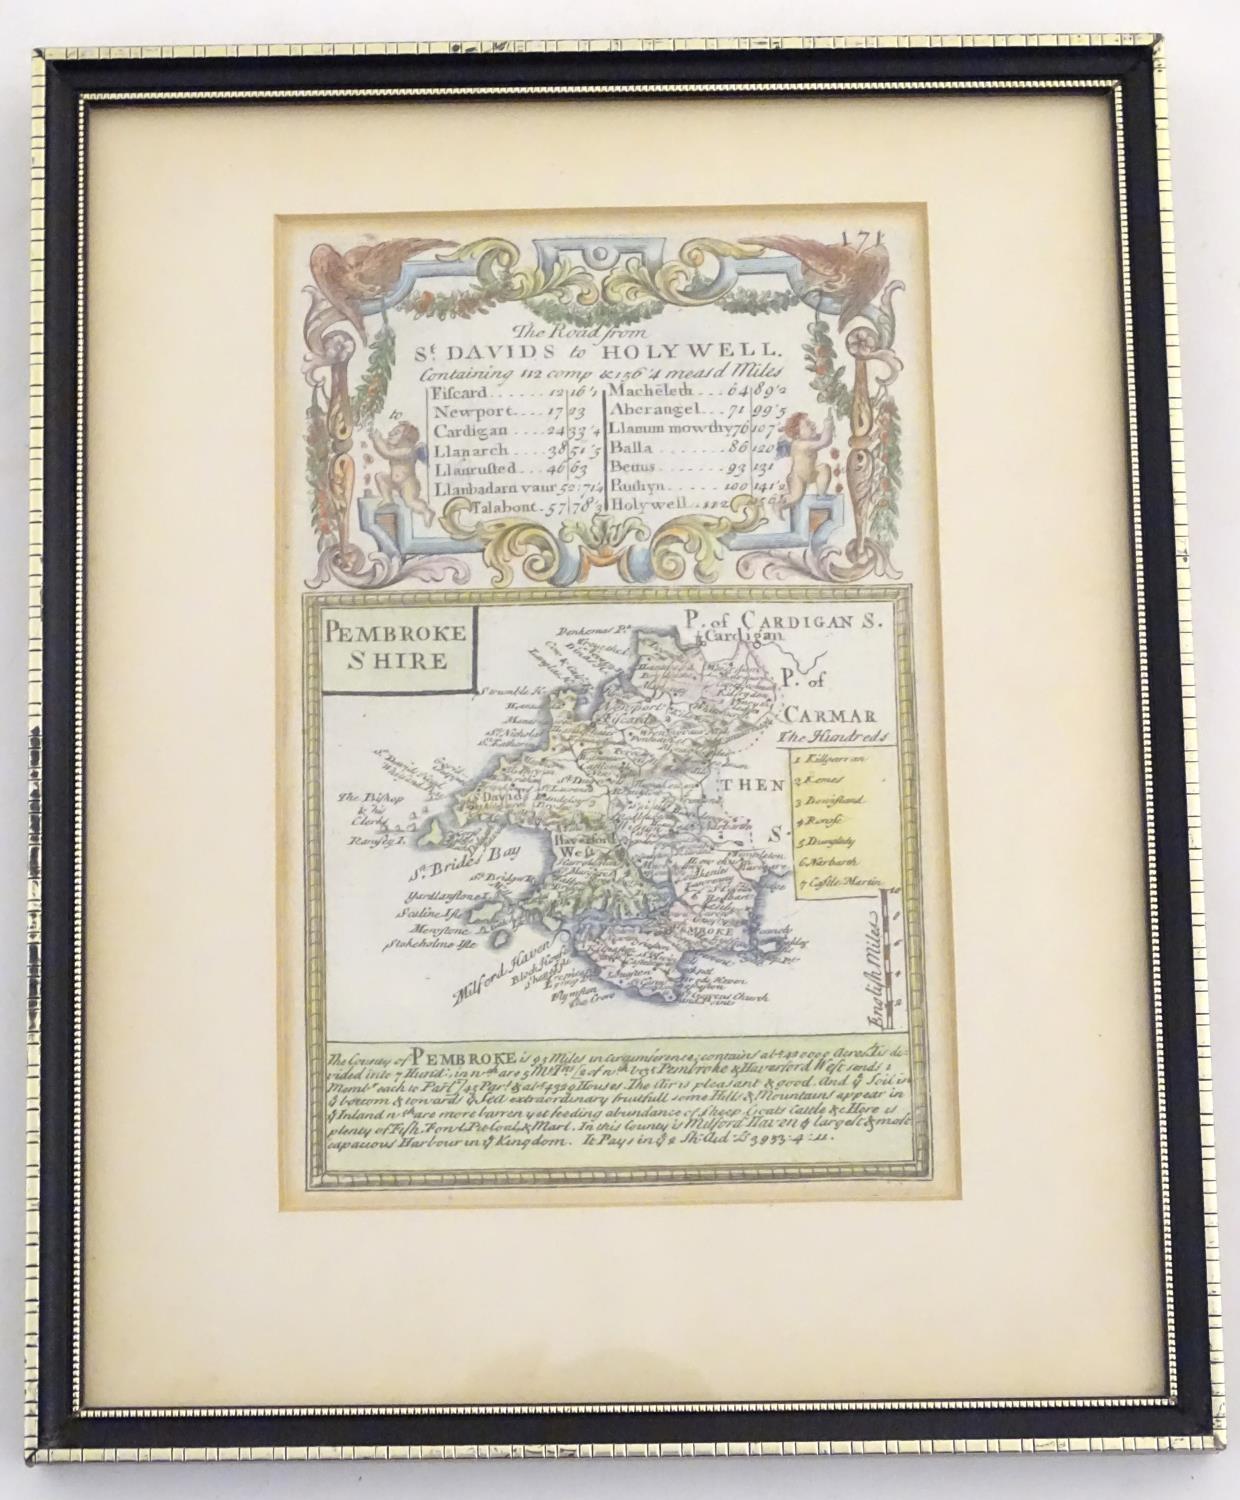 A double glazed 18thC hand coloured map of Pembrokeshire by John Ogilby, published in Owen & Bowen's